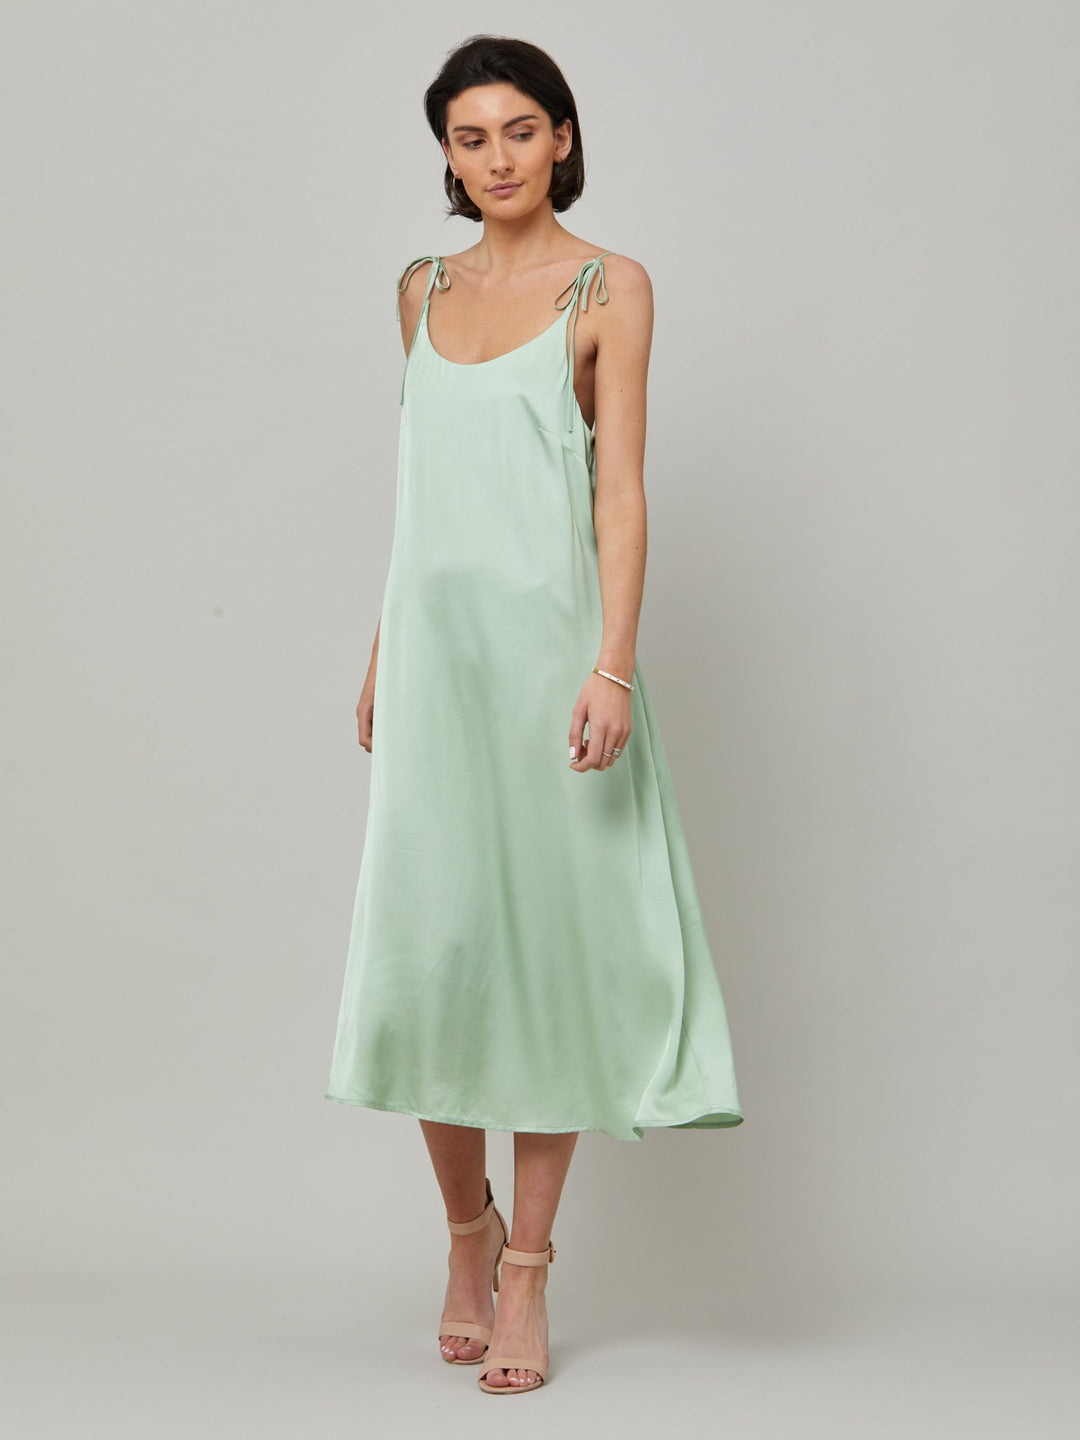 The Ultimate slip dress. Classic occasion wear, modernized.  Meet the Sonica dress in luxurious tea green satin viscose. An easy-fitting slip dress that falls to the mid-calf. Features adjustable tie straps at the shoulder and an elegant plunging back detail.  . Attending a summer wedding? Mother of the bride? Heading to the races? This is the dress for you. Designed in Ireland by Helen McAlinden. Made in Europe. Free shipping to the EU & UK.